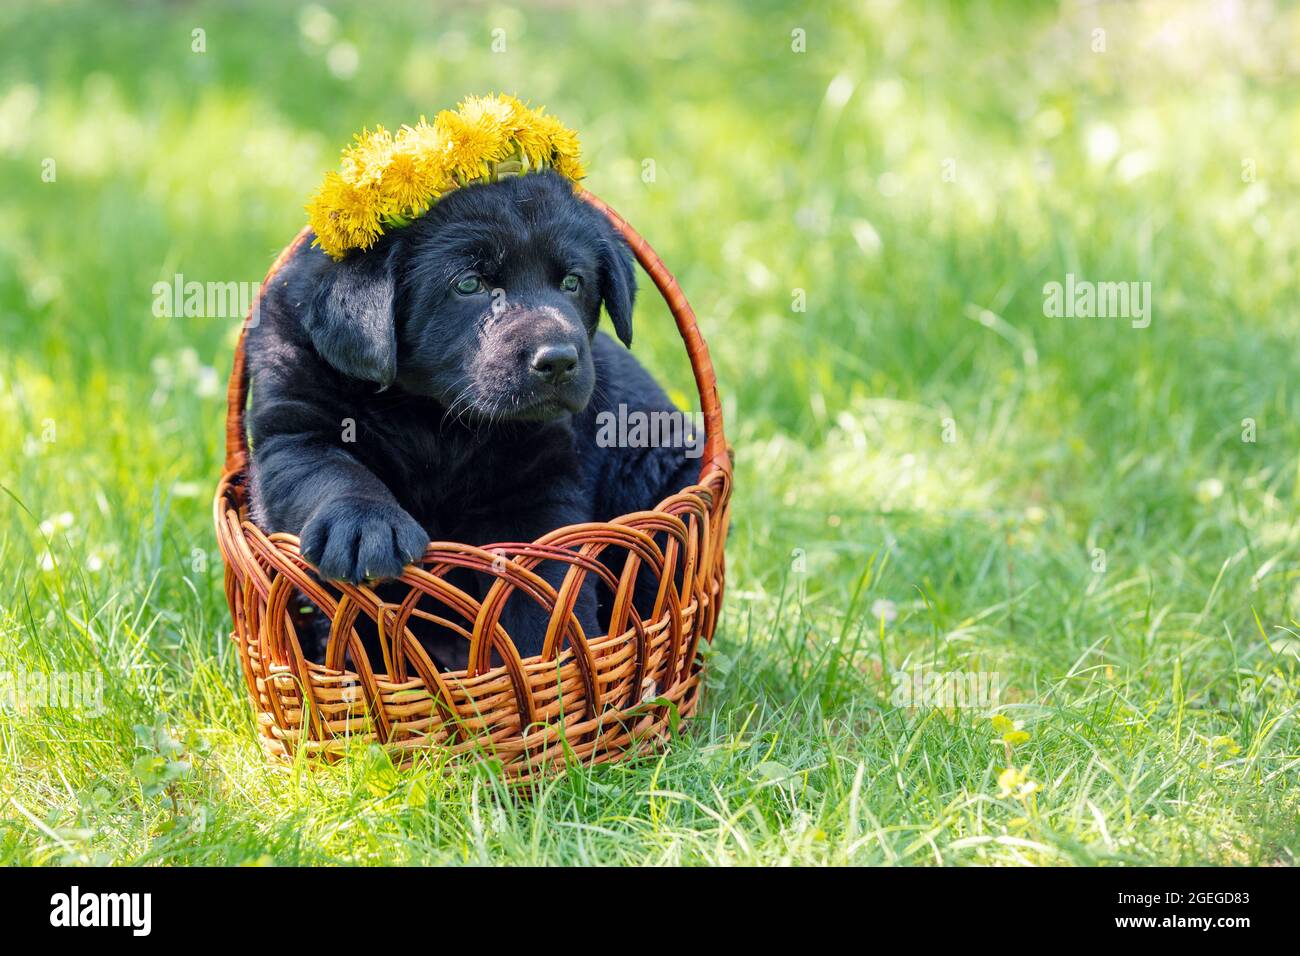 Black labrador retriever puppy sitting in a basket on the grass in the spring garden. Puppy crowned with a dandelion wreath Stock Photo